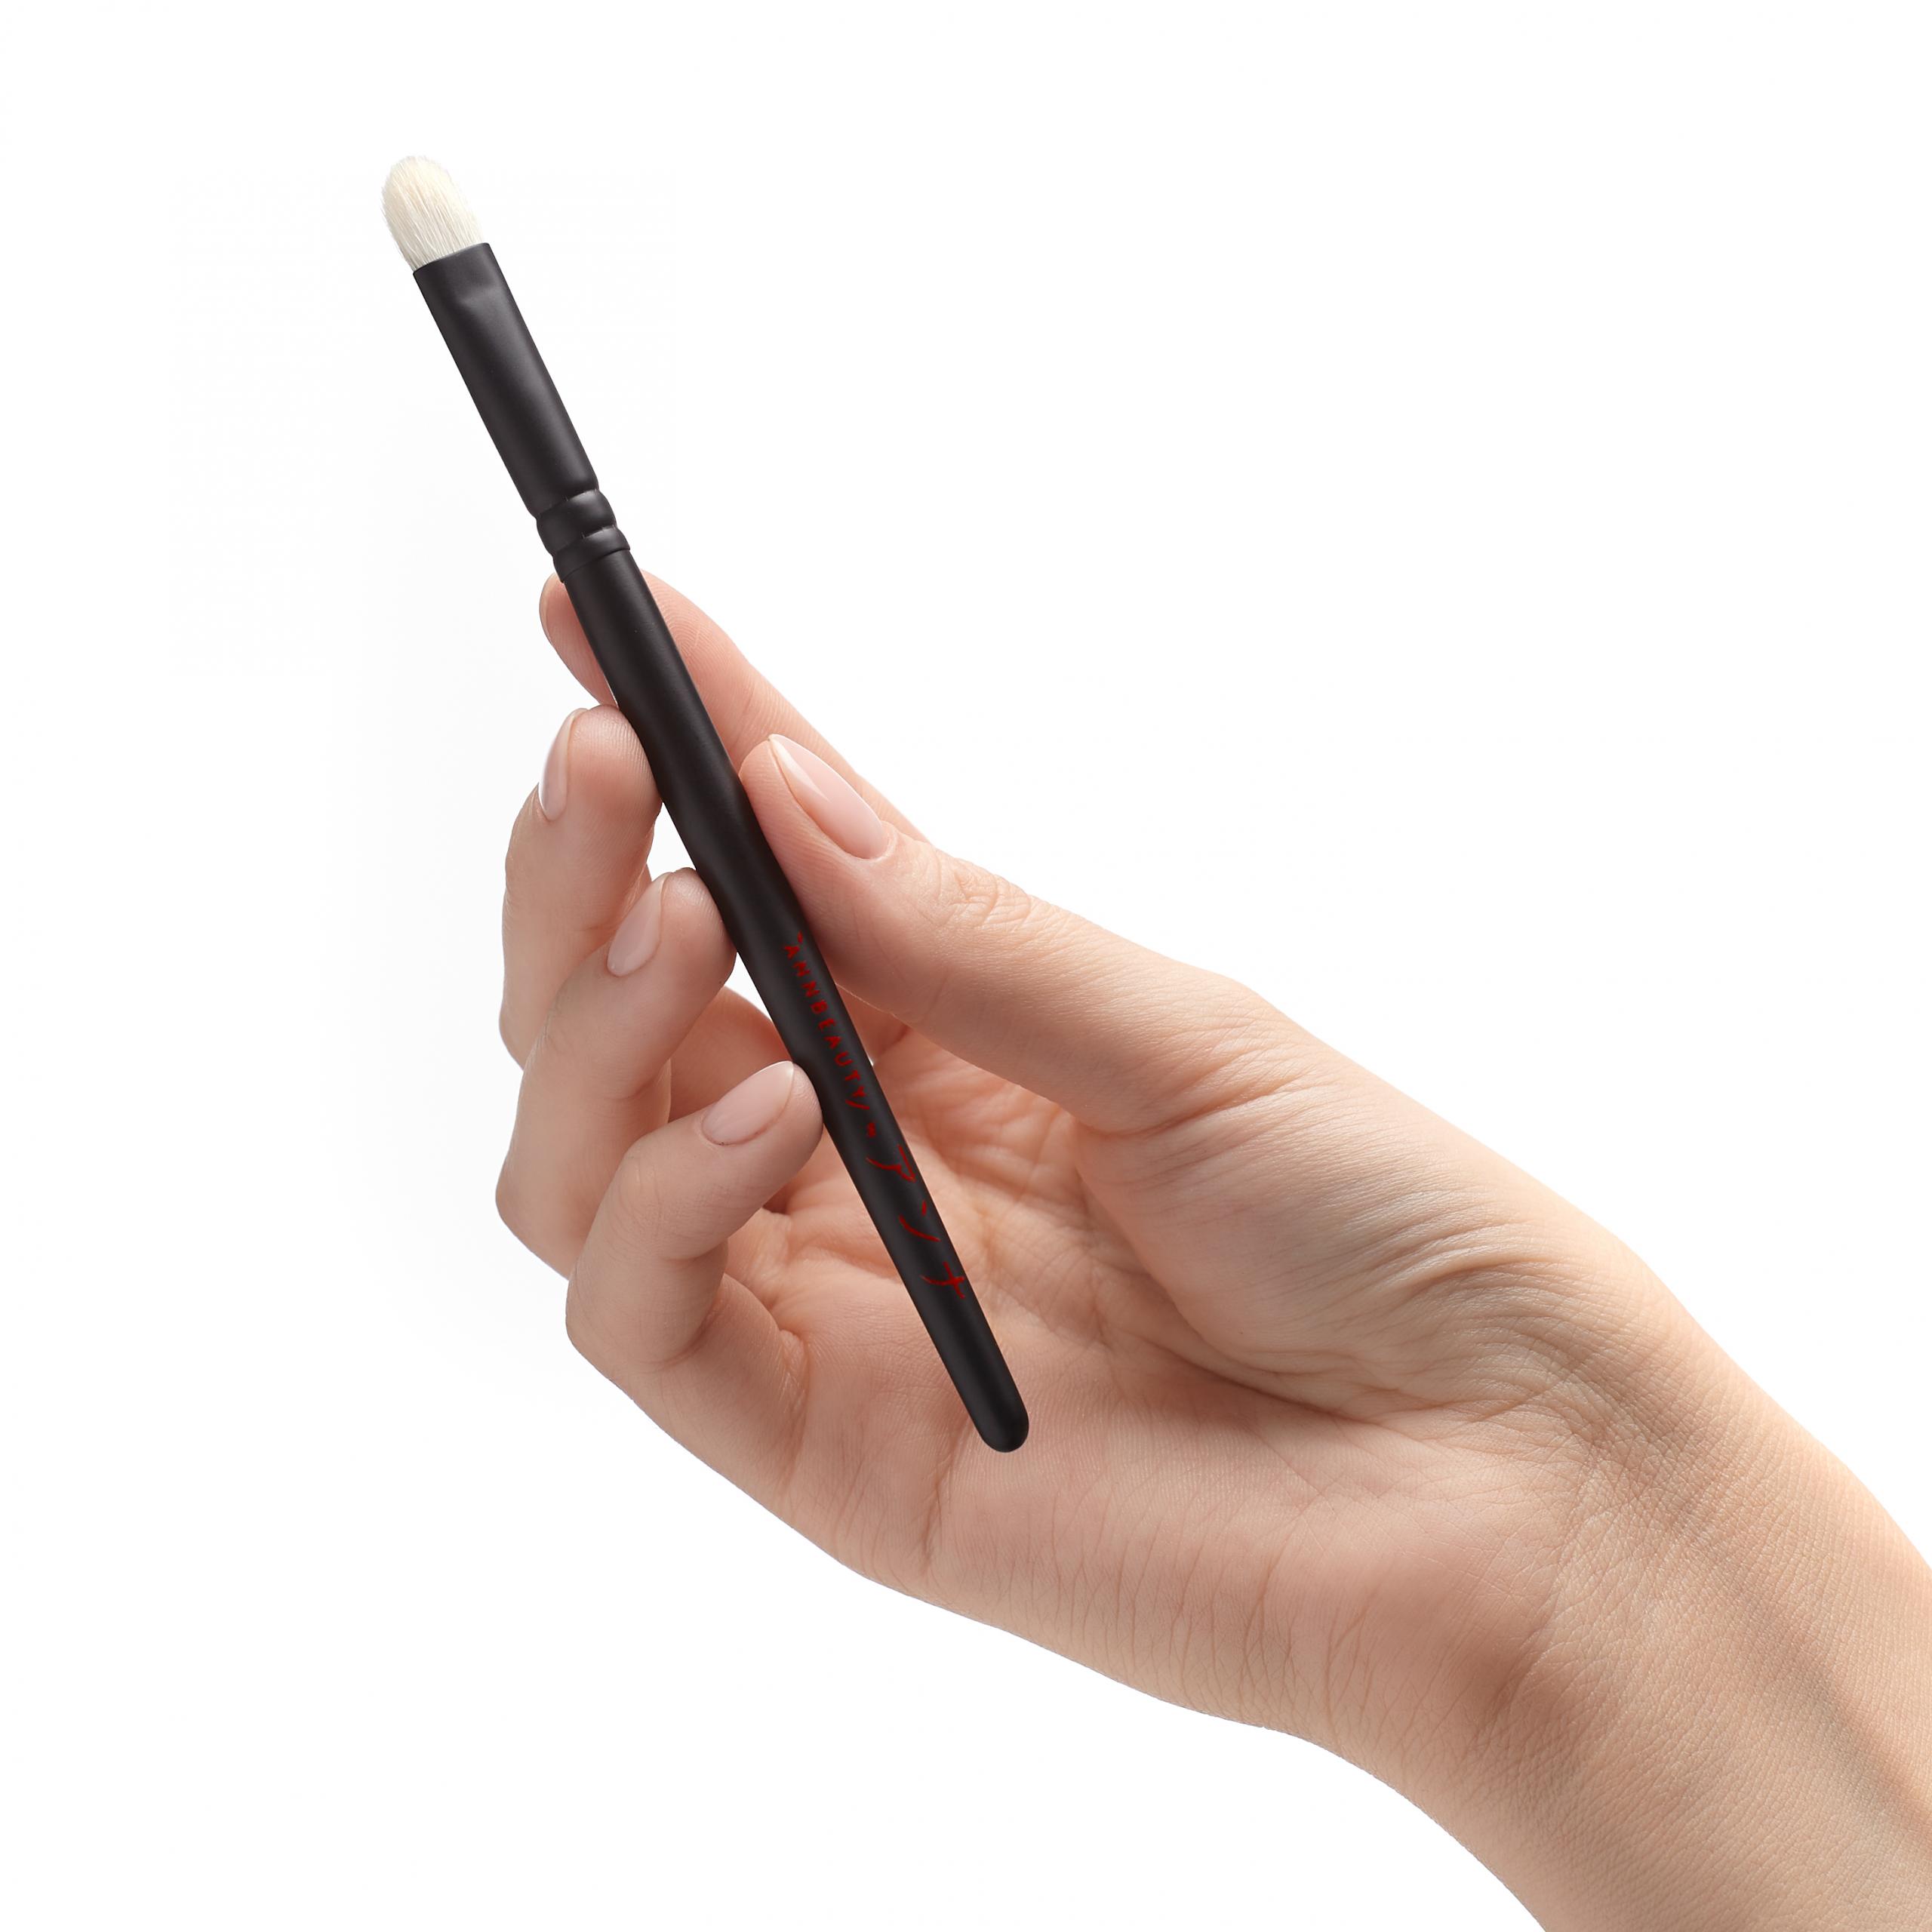 Annbeauty S16 Eyeshadow and Pencil Brush in hand